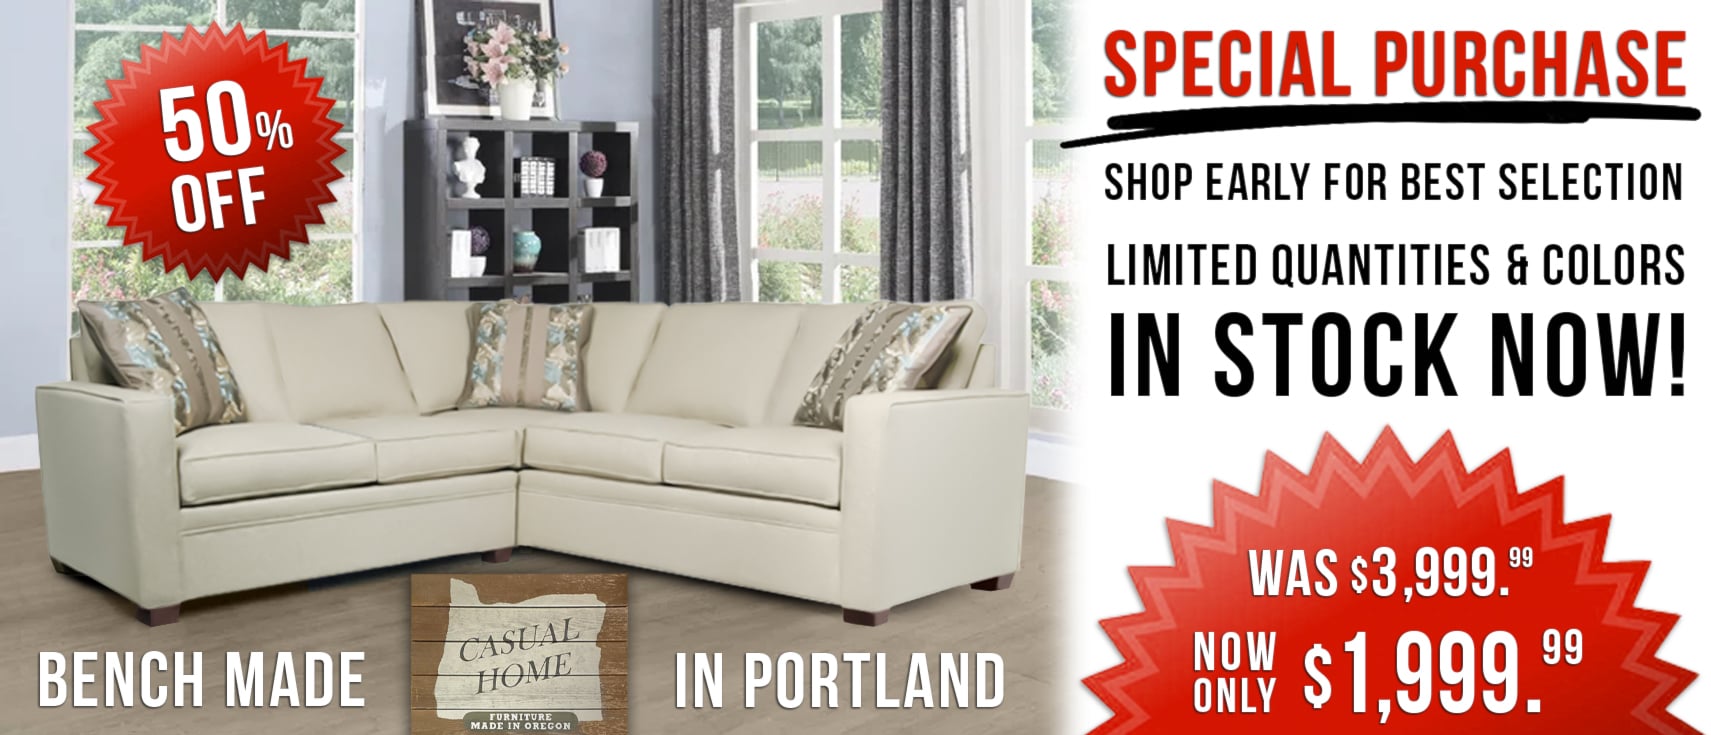 Casual Home Milano Sectional Sale!